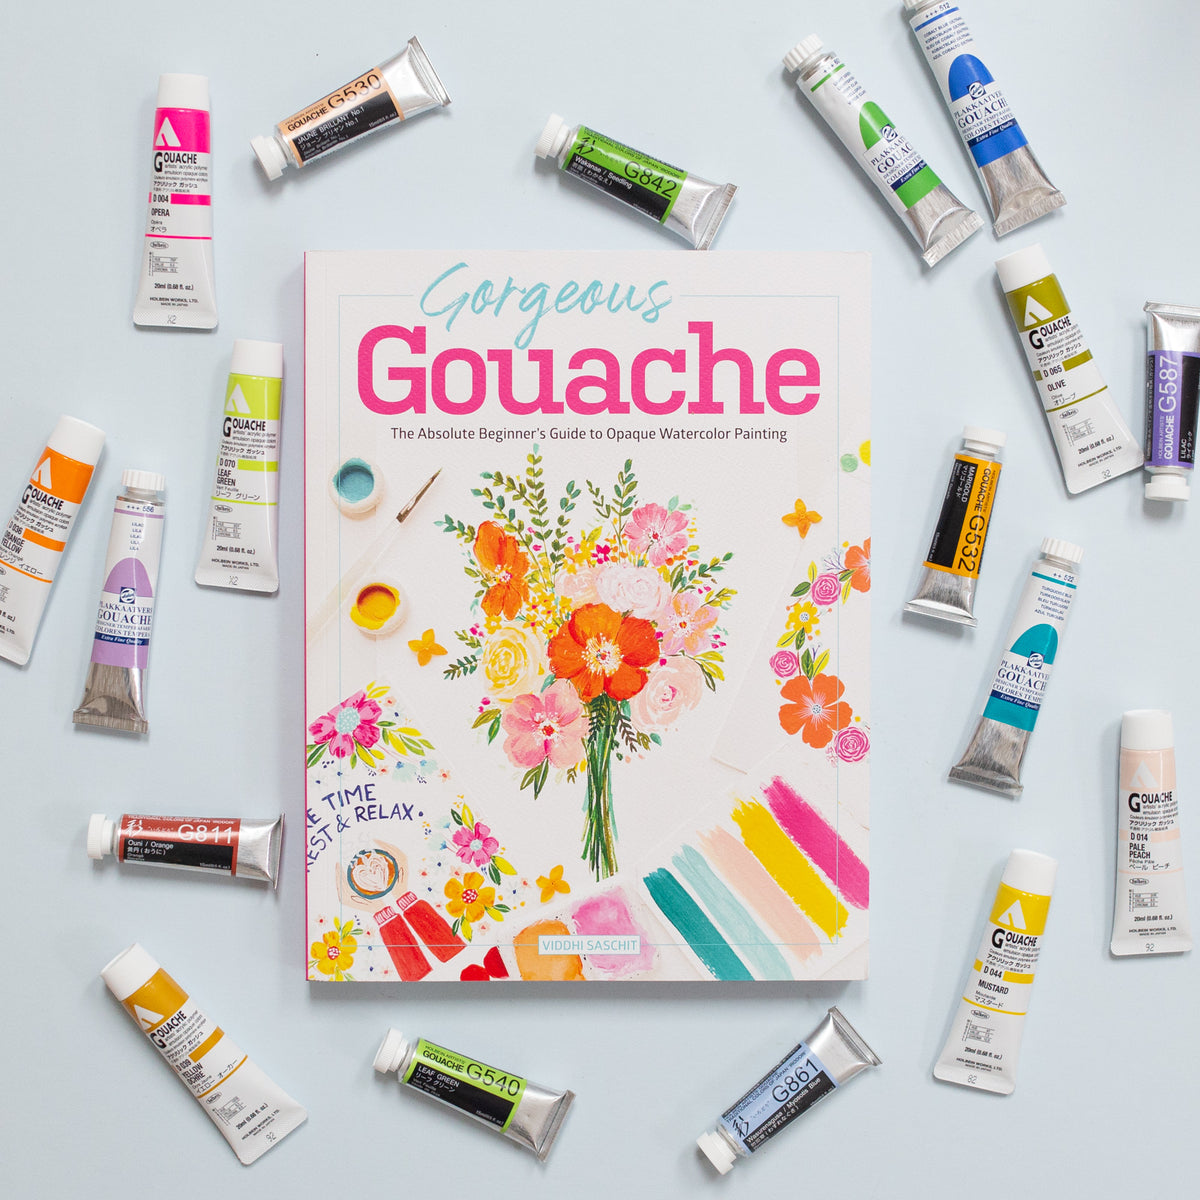 Gorgeous Gouache: The Absolute Beginner's Guide to Opaque Watercolor Painting by Viddhi Saschit